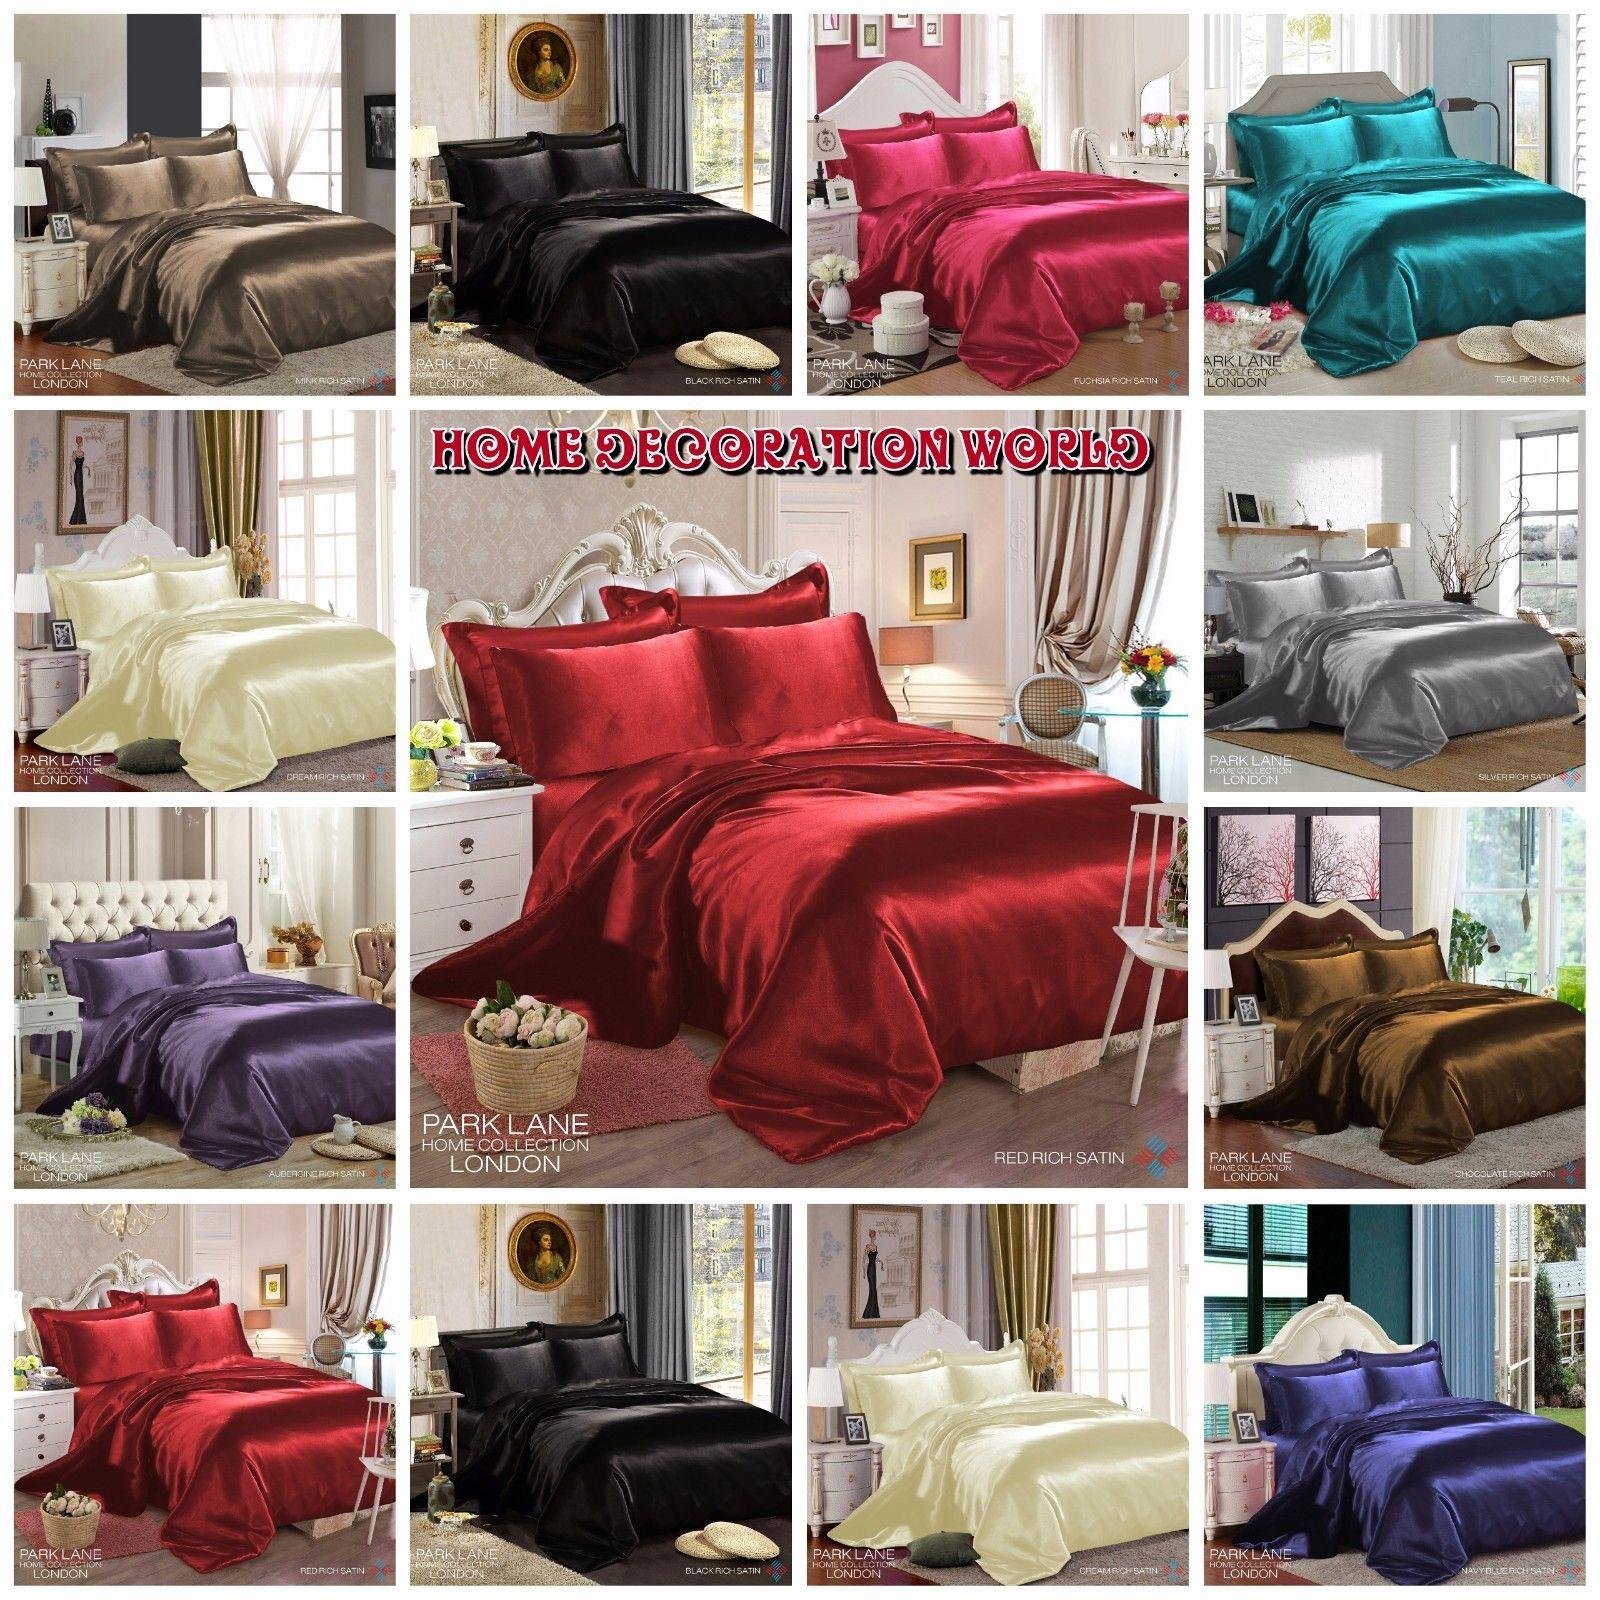 NEW KING SIZE 6PCS SATIN SILK BEDDING SET QUILT COVER FITTED SHEET PILLOW CASES